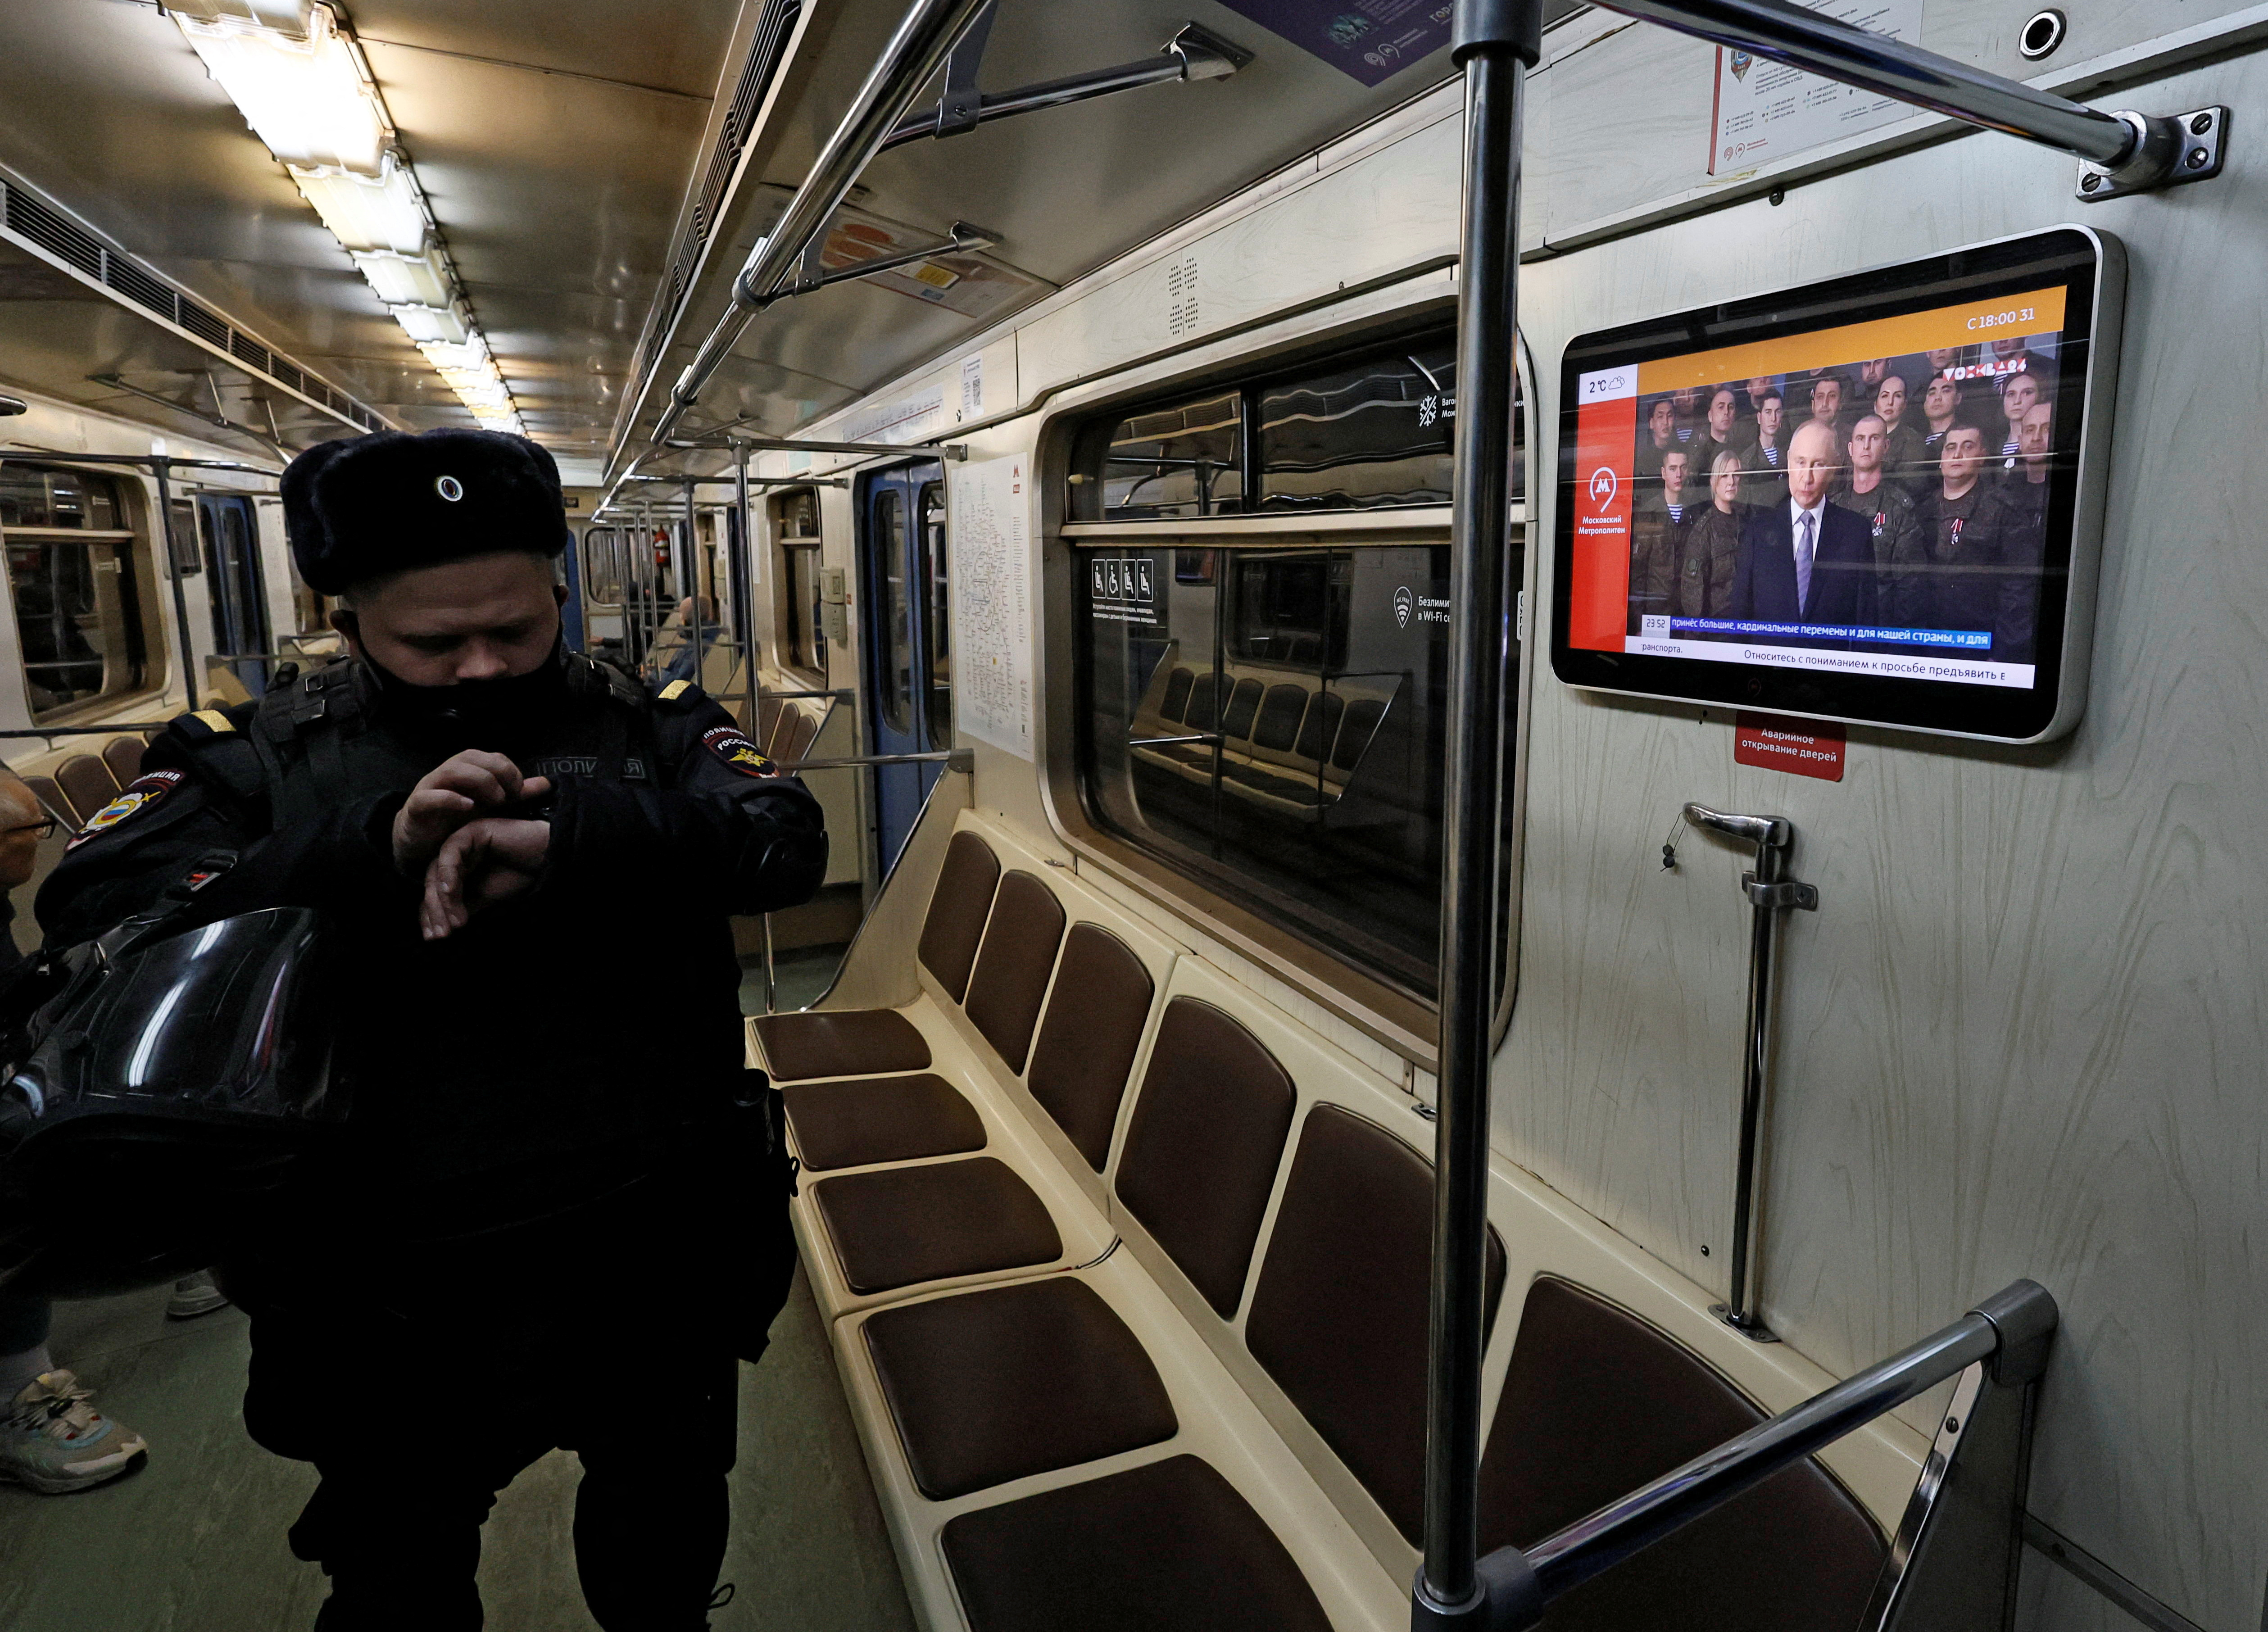 A police officer stands in front of a screen broadcasting Russian President Vladimir Putin's annual New Year address to the nation, in a subway train in Moscow